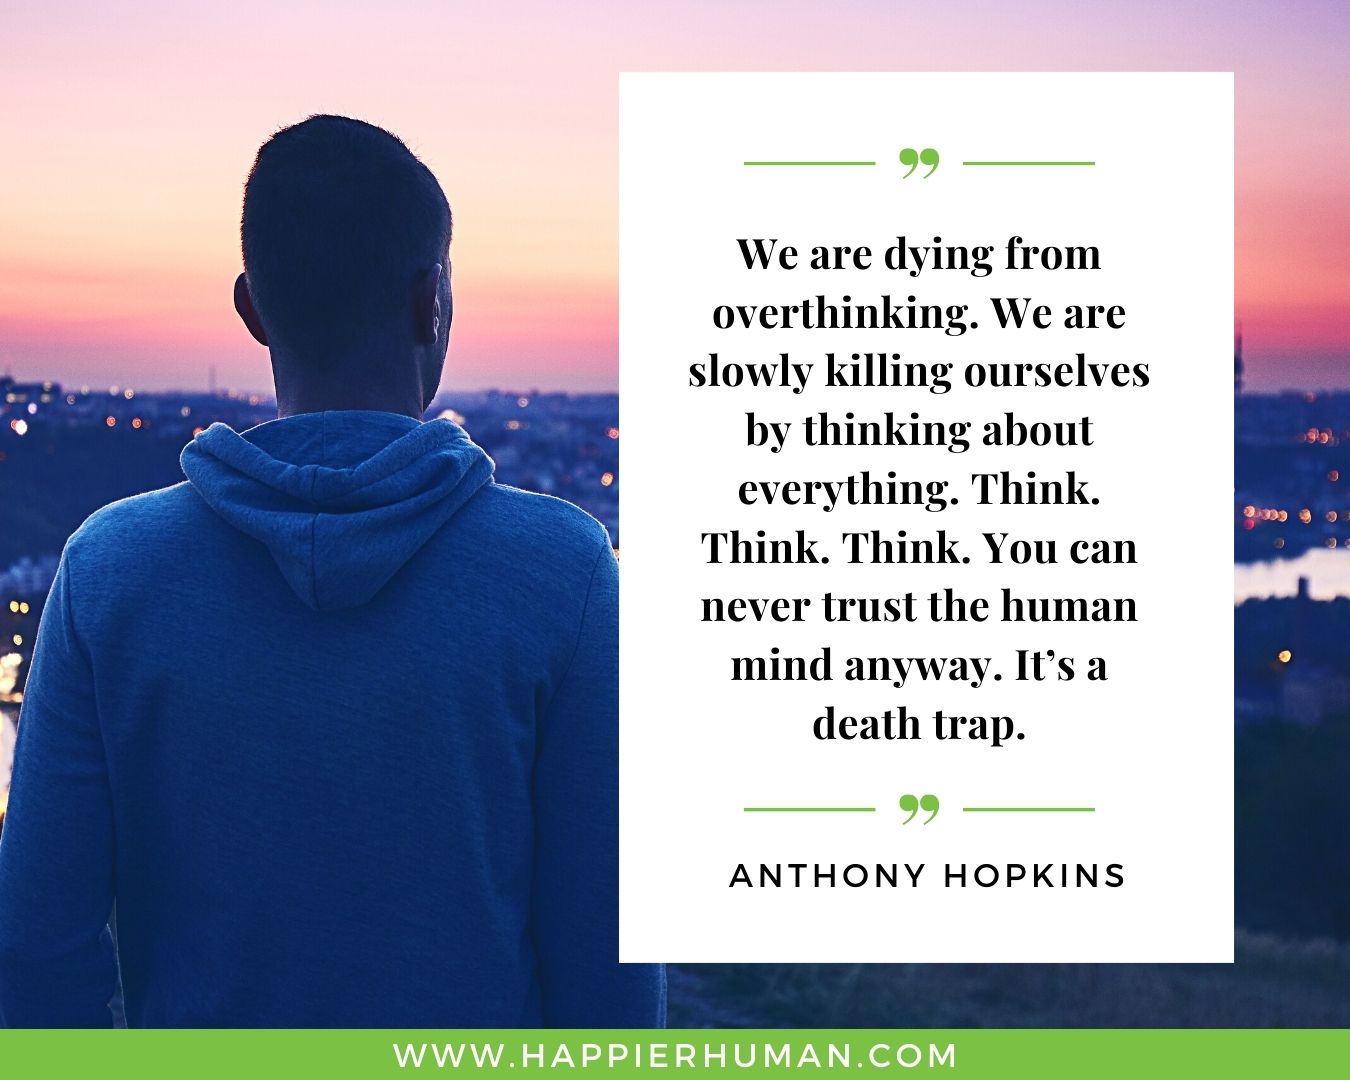 Overthinking Quotes - “We are dying from overthinking. We are slowly killing ourselves by thinking about everything. Think. Think. Think. You can never trust the human mind anyway. It’s a death trap.” - Anthony Hopkins